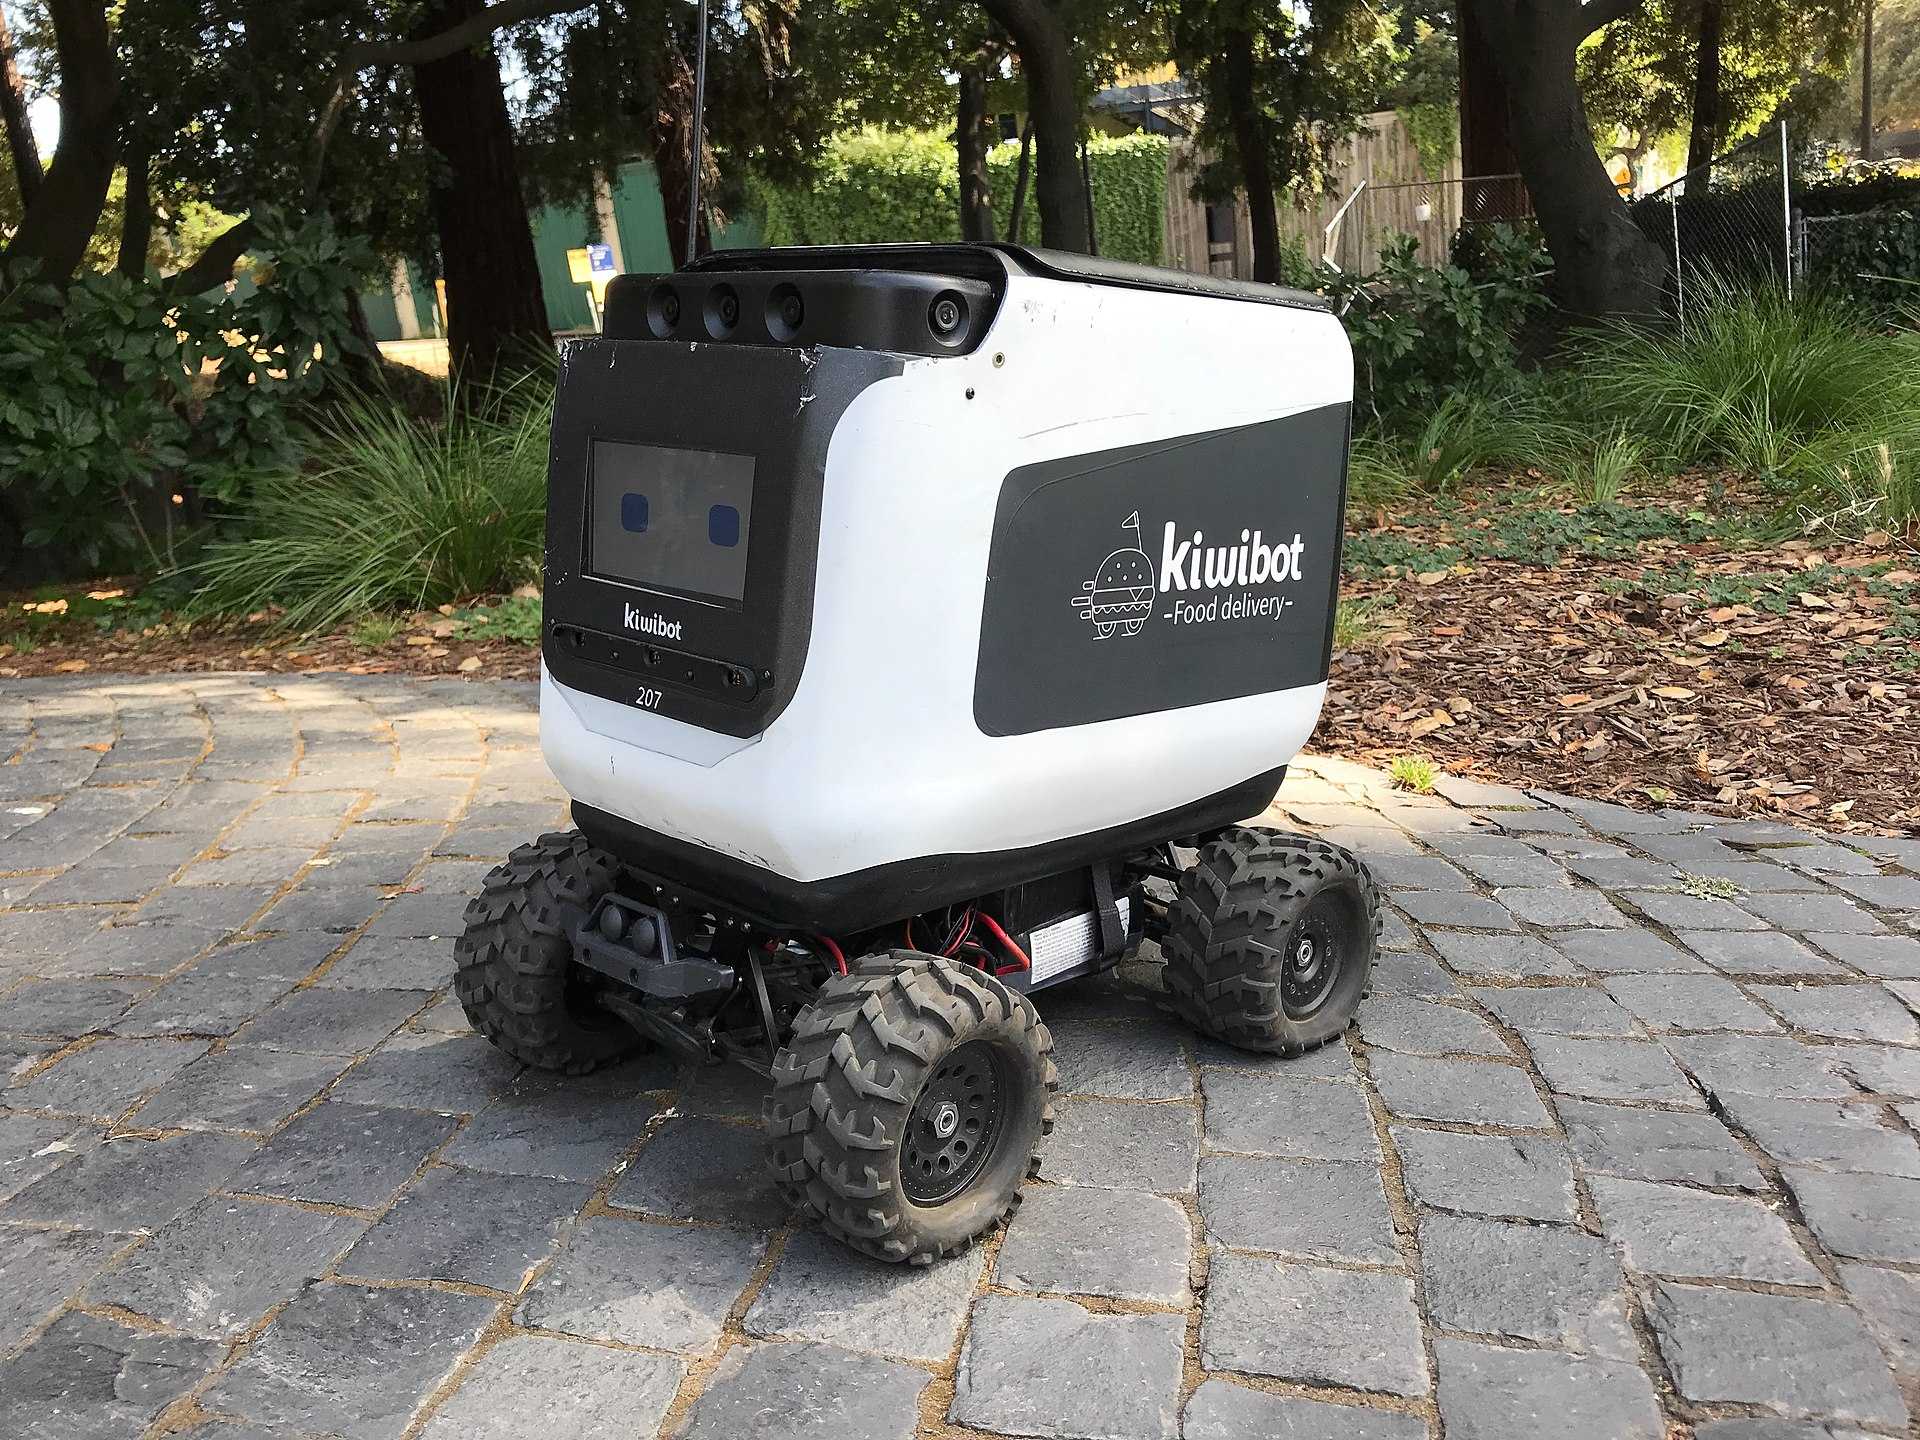 A Kiwibot delivery robot sits on a sidewalk of pavers.